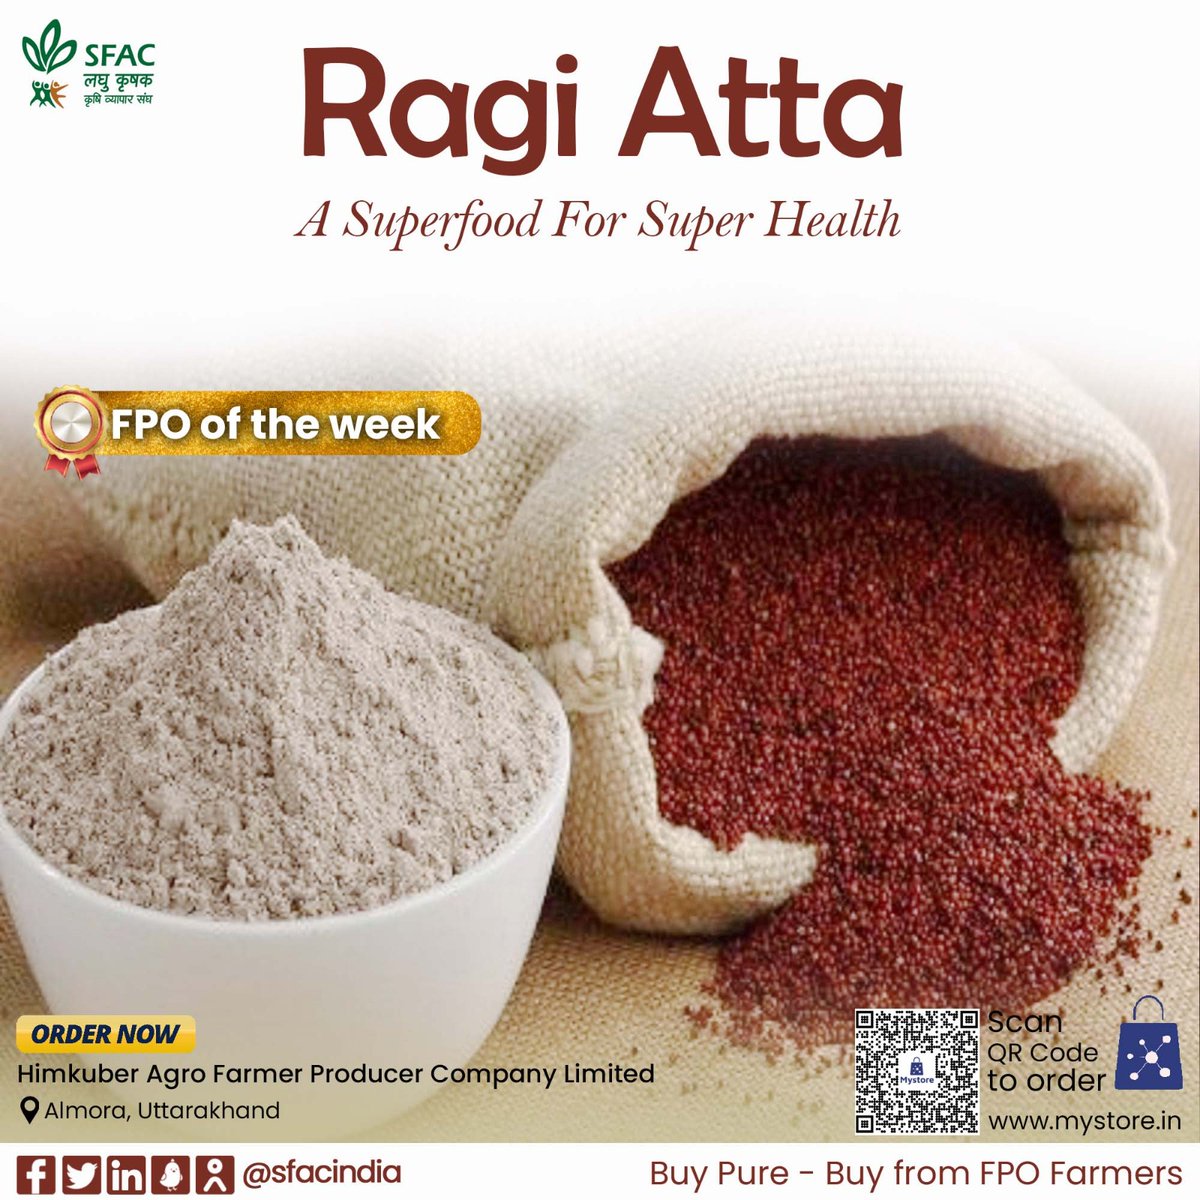 Start a healthy morning with crispy dosa, make delicious laddus or bake your favourite cake with the wholesome Ragi flour. Buy from FPO farmers at👇 mystore.in/en/product/mad… Pure & organic @AgriGoI @ONDC_Official @ukcmo @PIB_India @mygovindia #BocalforLocal #HealthyHabits